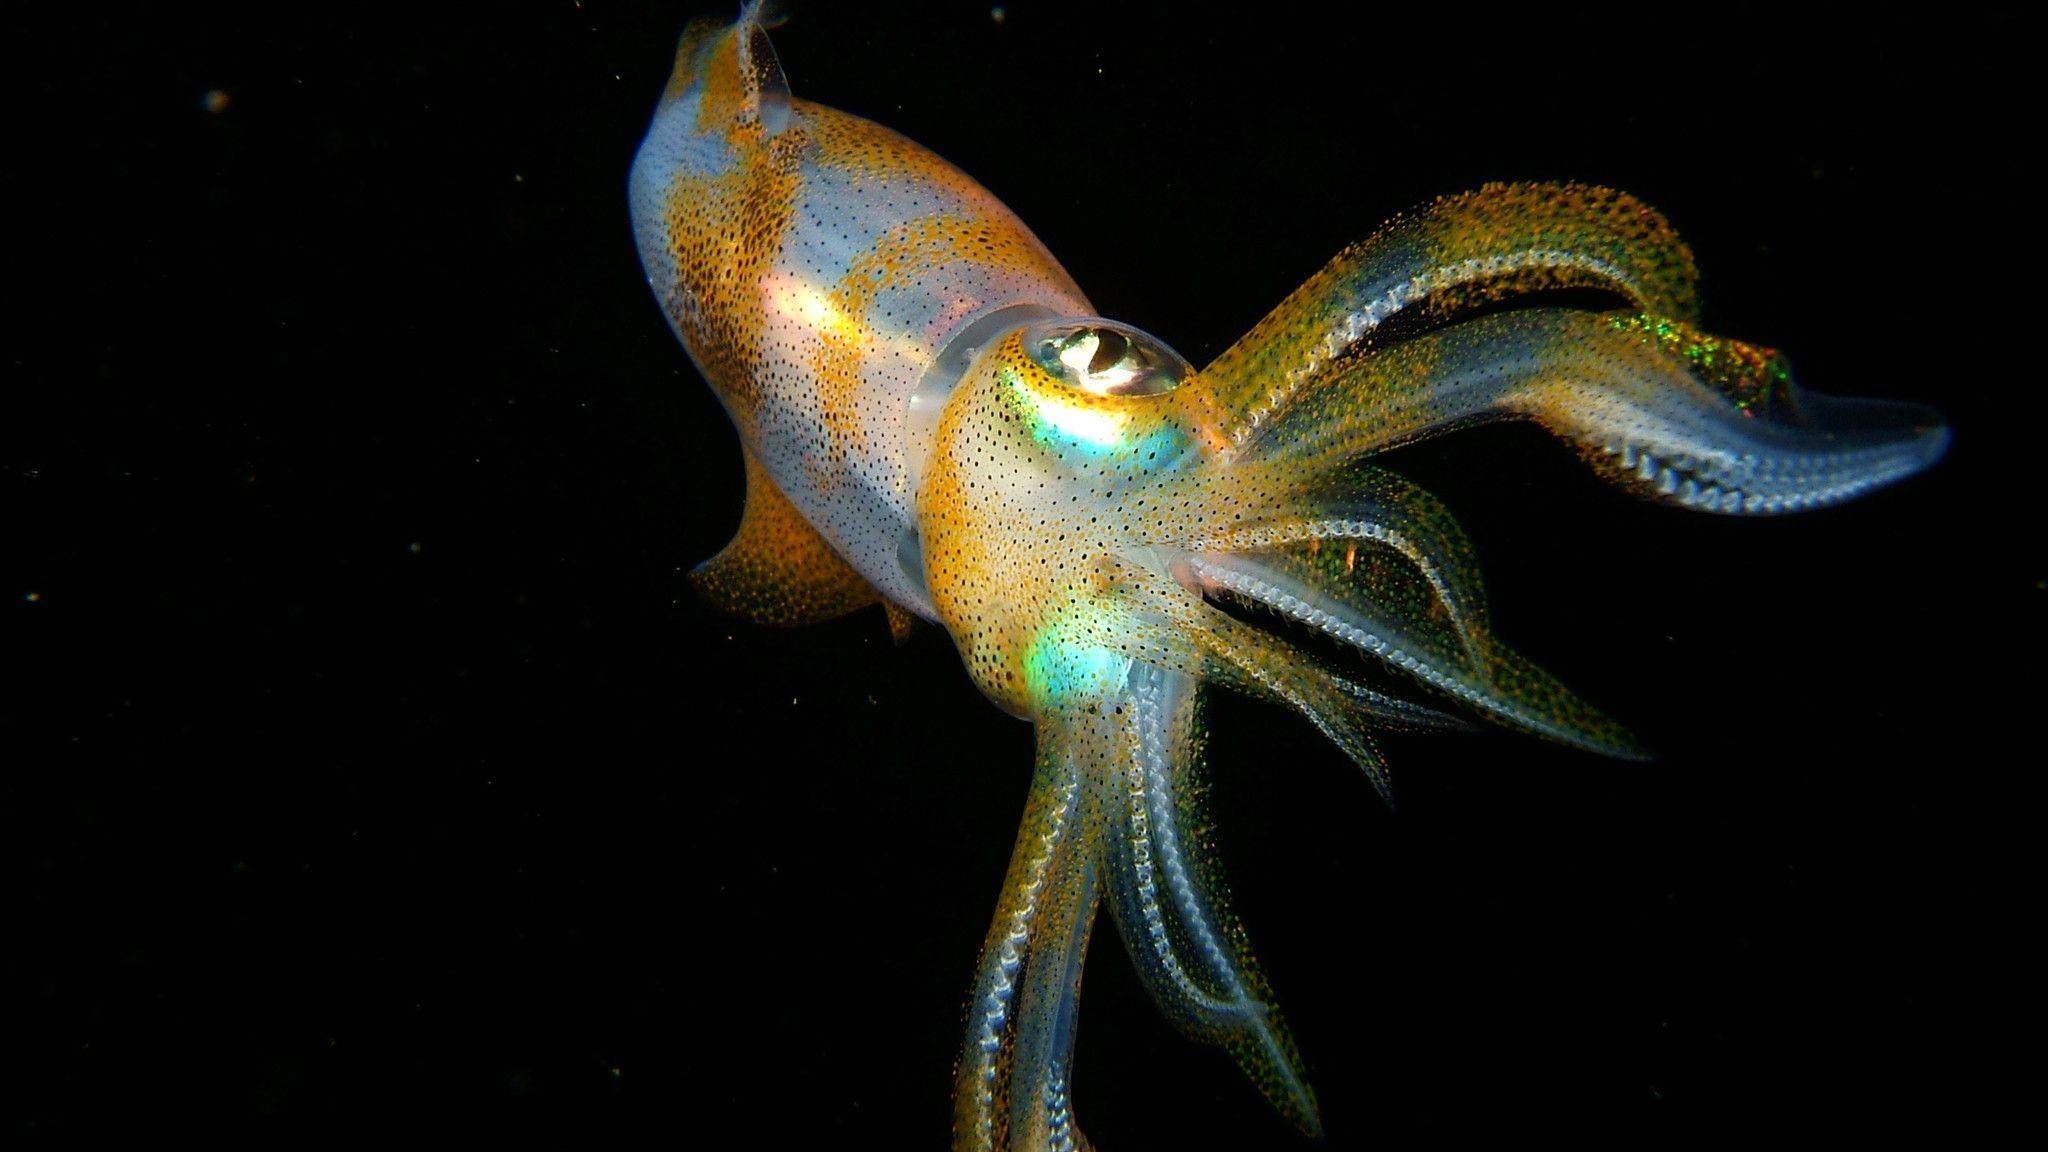 Awesome Squid wallpaper  2048x1152  11490  Squid games Wallpaper  Animals beautiful